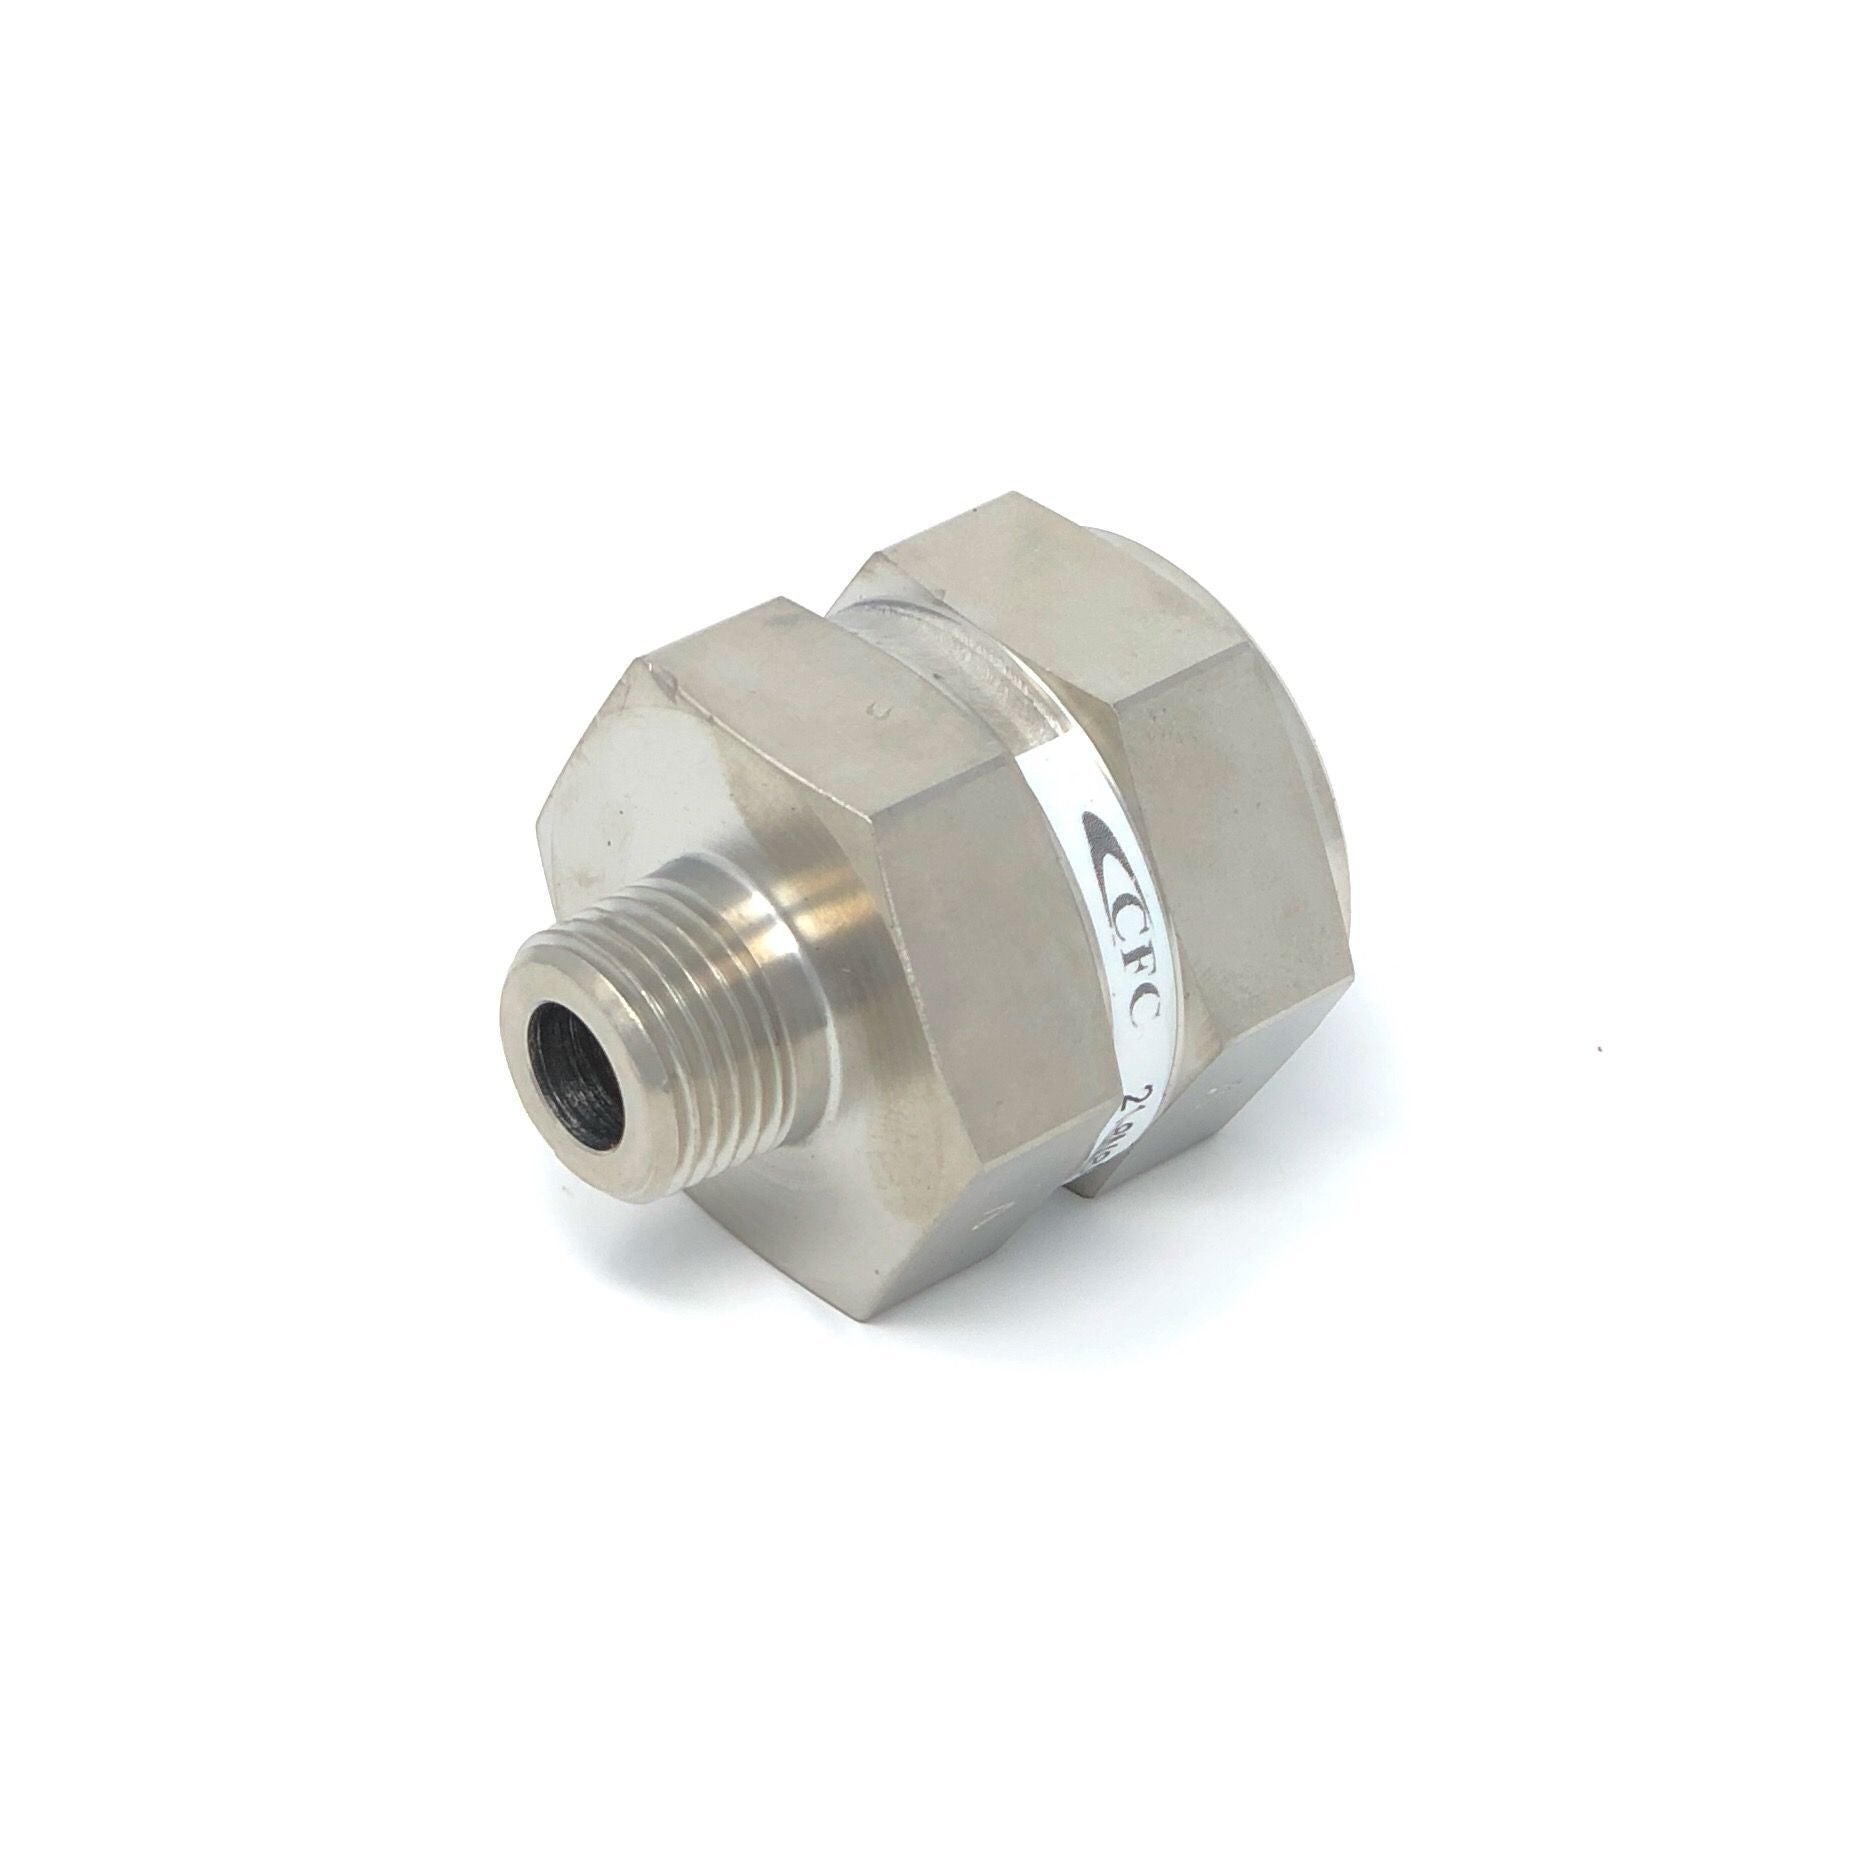 21-6S6S-10S : Chase High Pressure Inline Filter, 6000psi, #6 SAE (3/8") , 10 Micron, No Visual Indicator, No Bypass